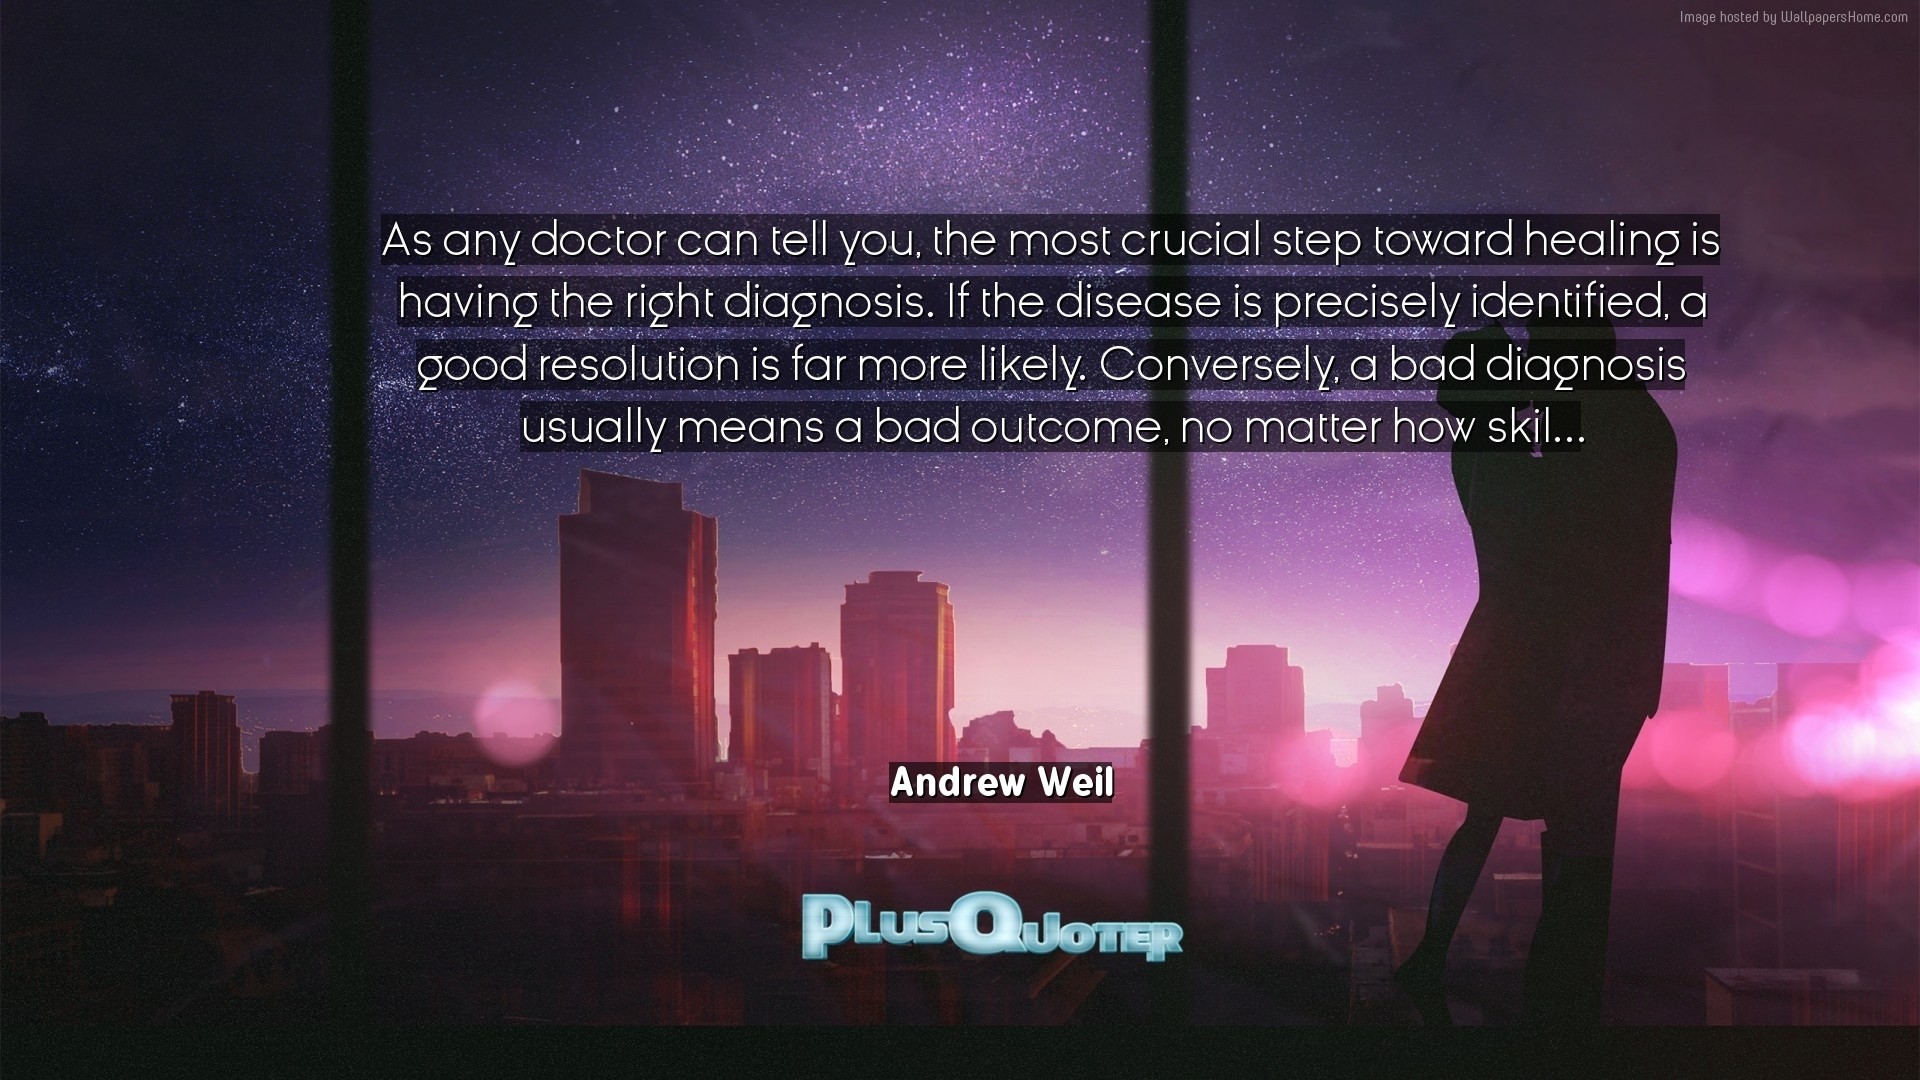 1920x1080 Download Wallpaper with inspirational Quotes- "As any doctor can tell you,  the most